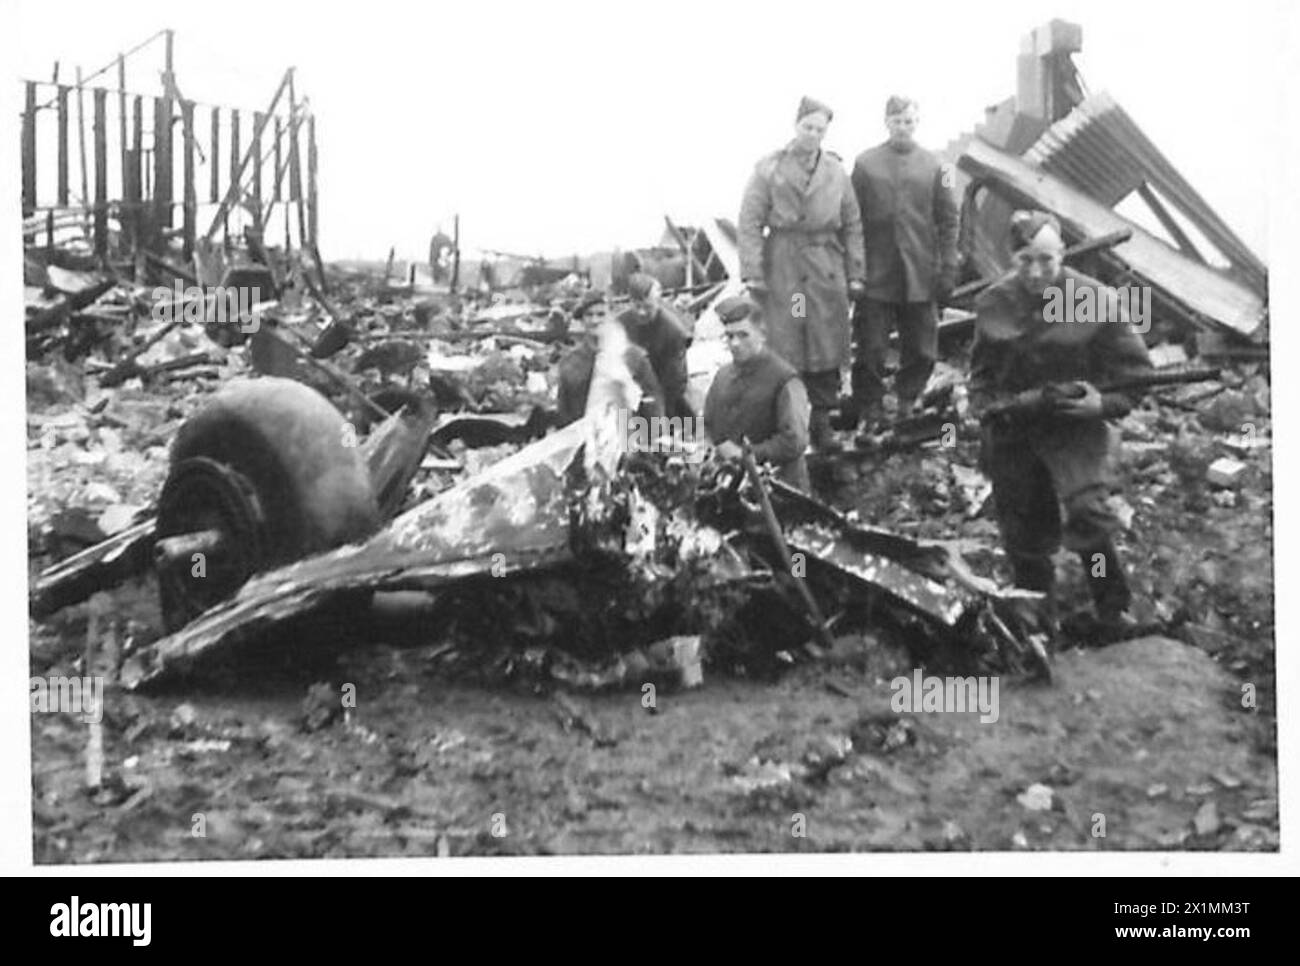 ACK-ACK GUNNERS DESTROY RAIDER - Gunners examining the wreckage of a German raider destroyed by A.A.fire, British Army Stock Photo